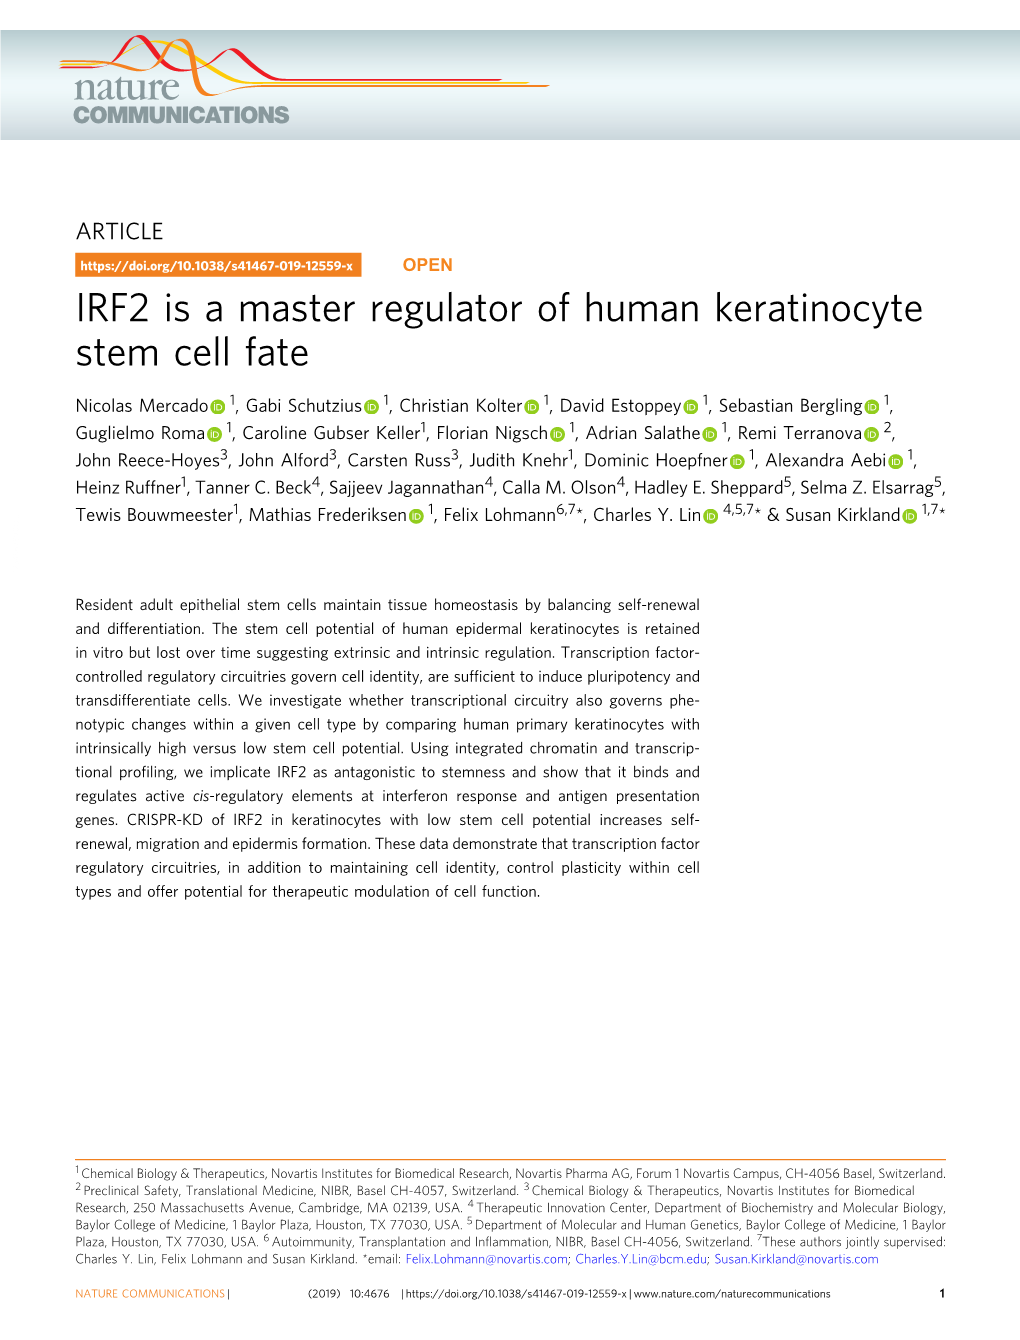 IRF2 Is a Master Regulator of Human Keratinocyte Stem Cell Fate